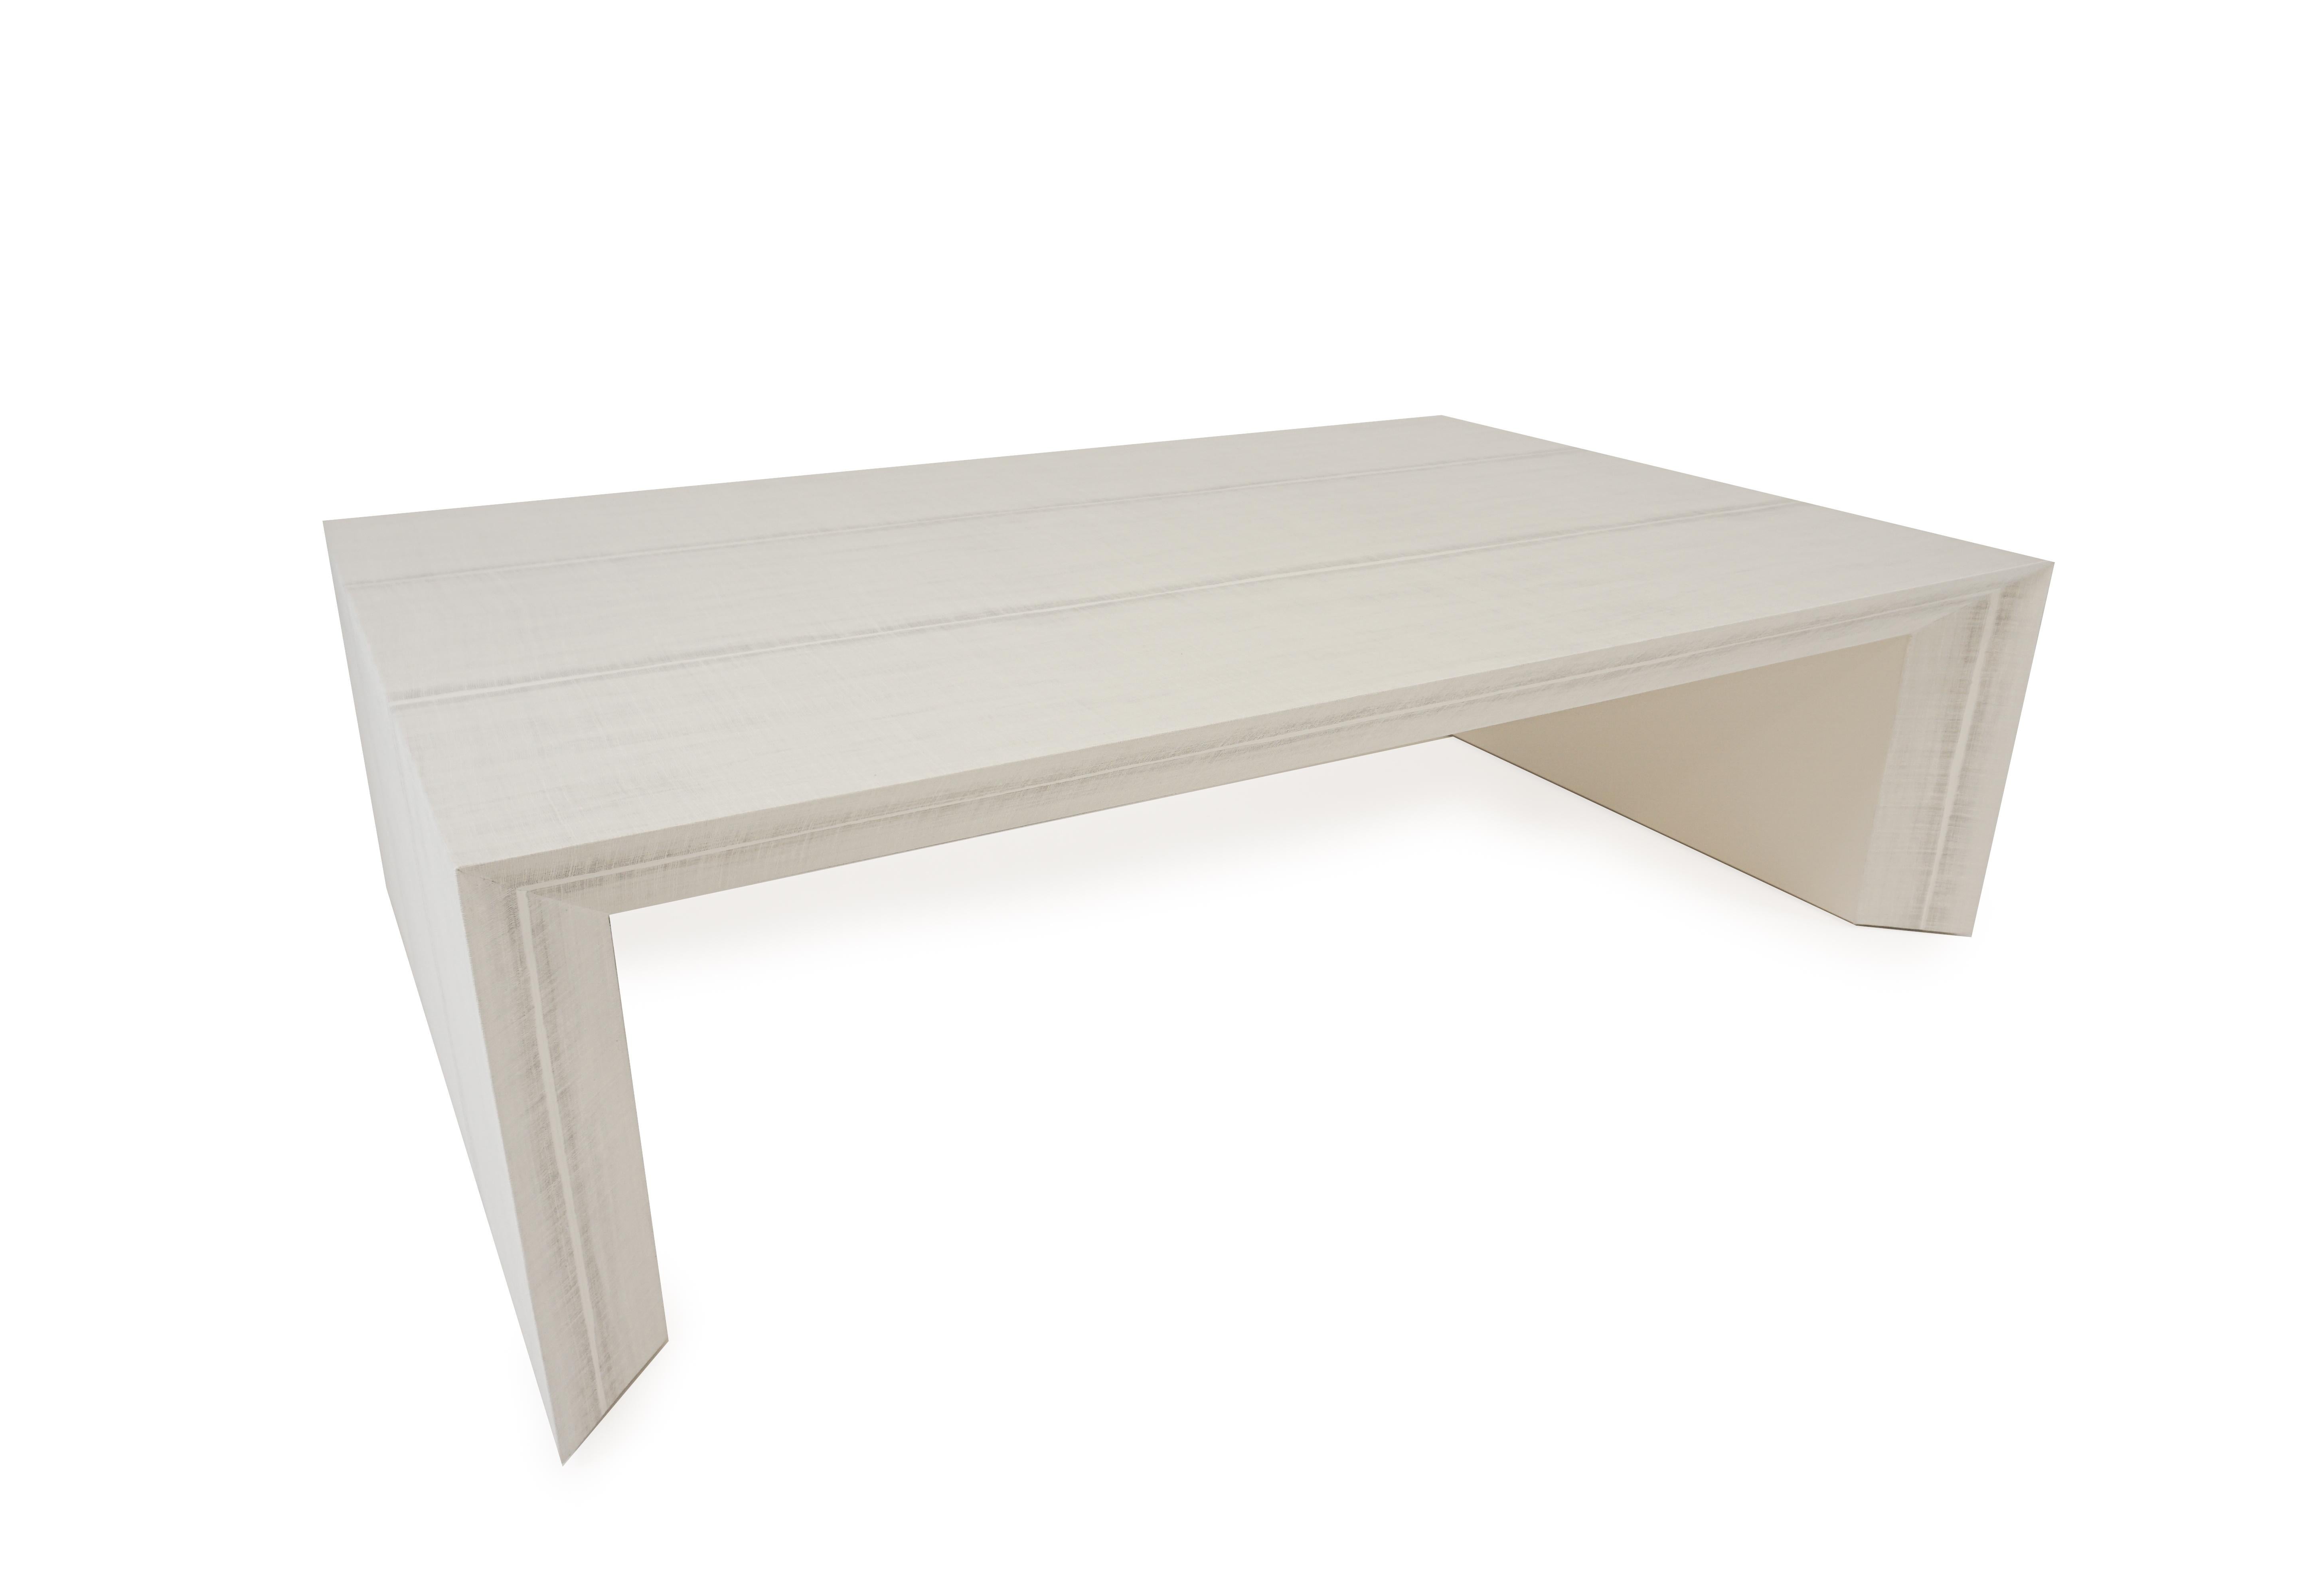 About this piece
This customizable table features a waterfall design, beveled edges and a vinyl faux grasscloth. This table can also be done in lacquer, paint or stained wood. Our tables and case pieces are built by hand with real hardwoods or MDF